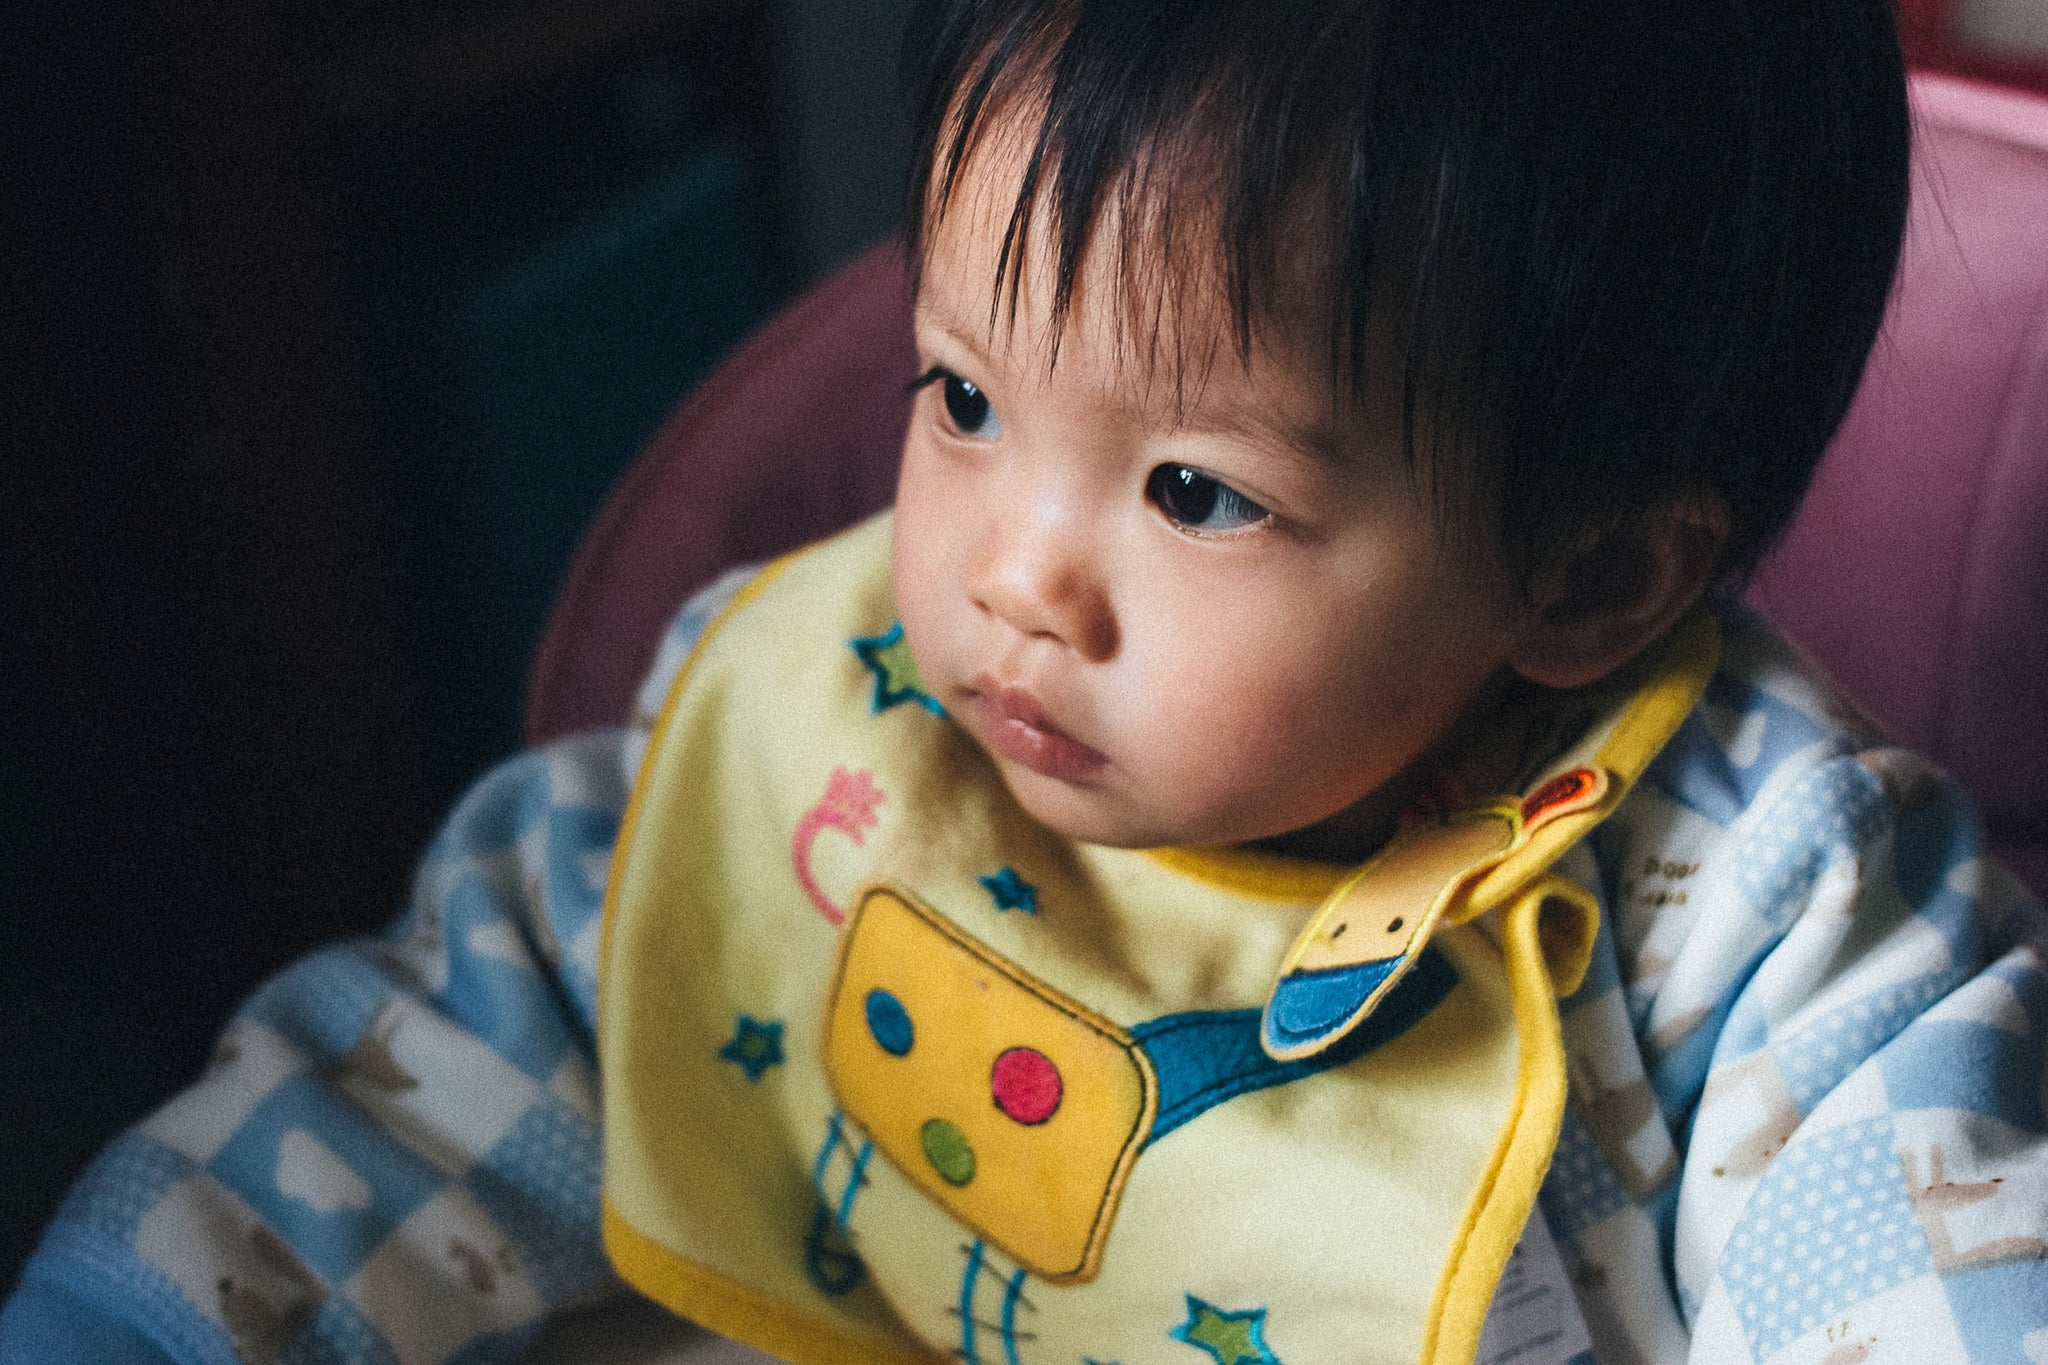 How to Breeze Through Baby Laundry and Mealtimes - Baby Bibs to the Rescue!